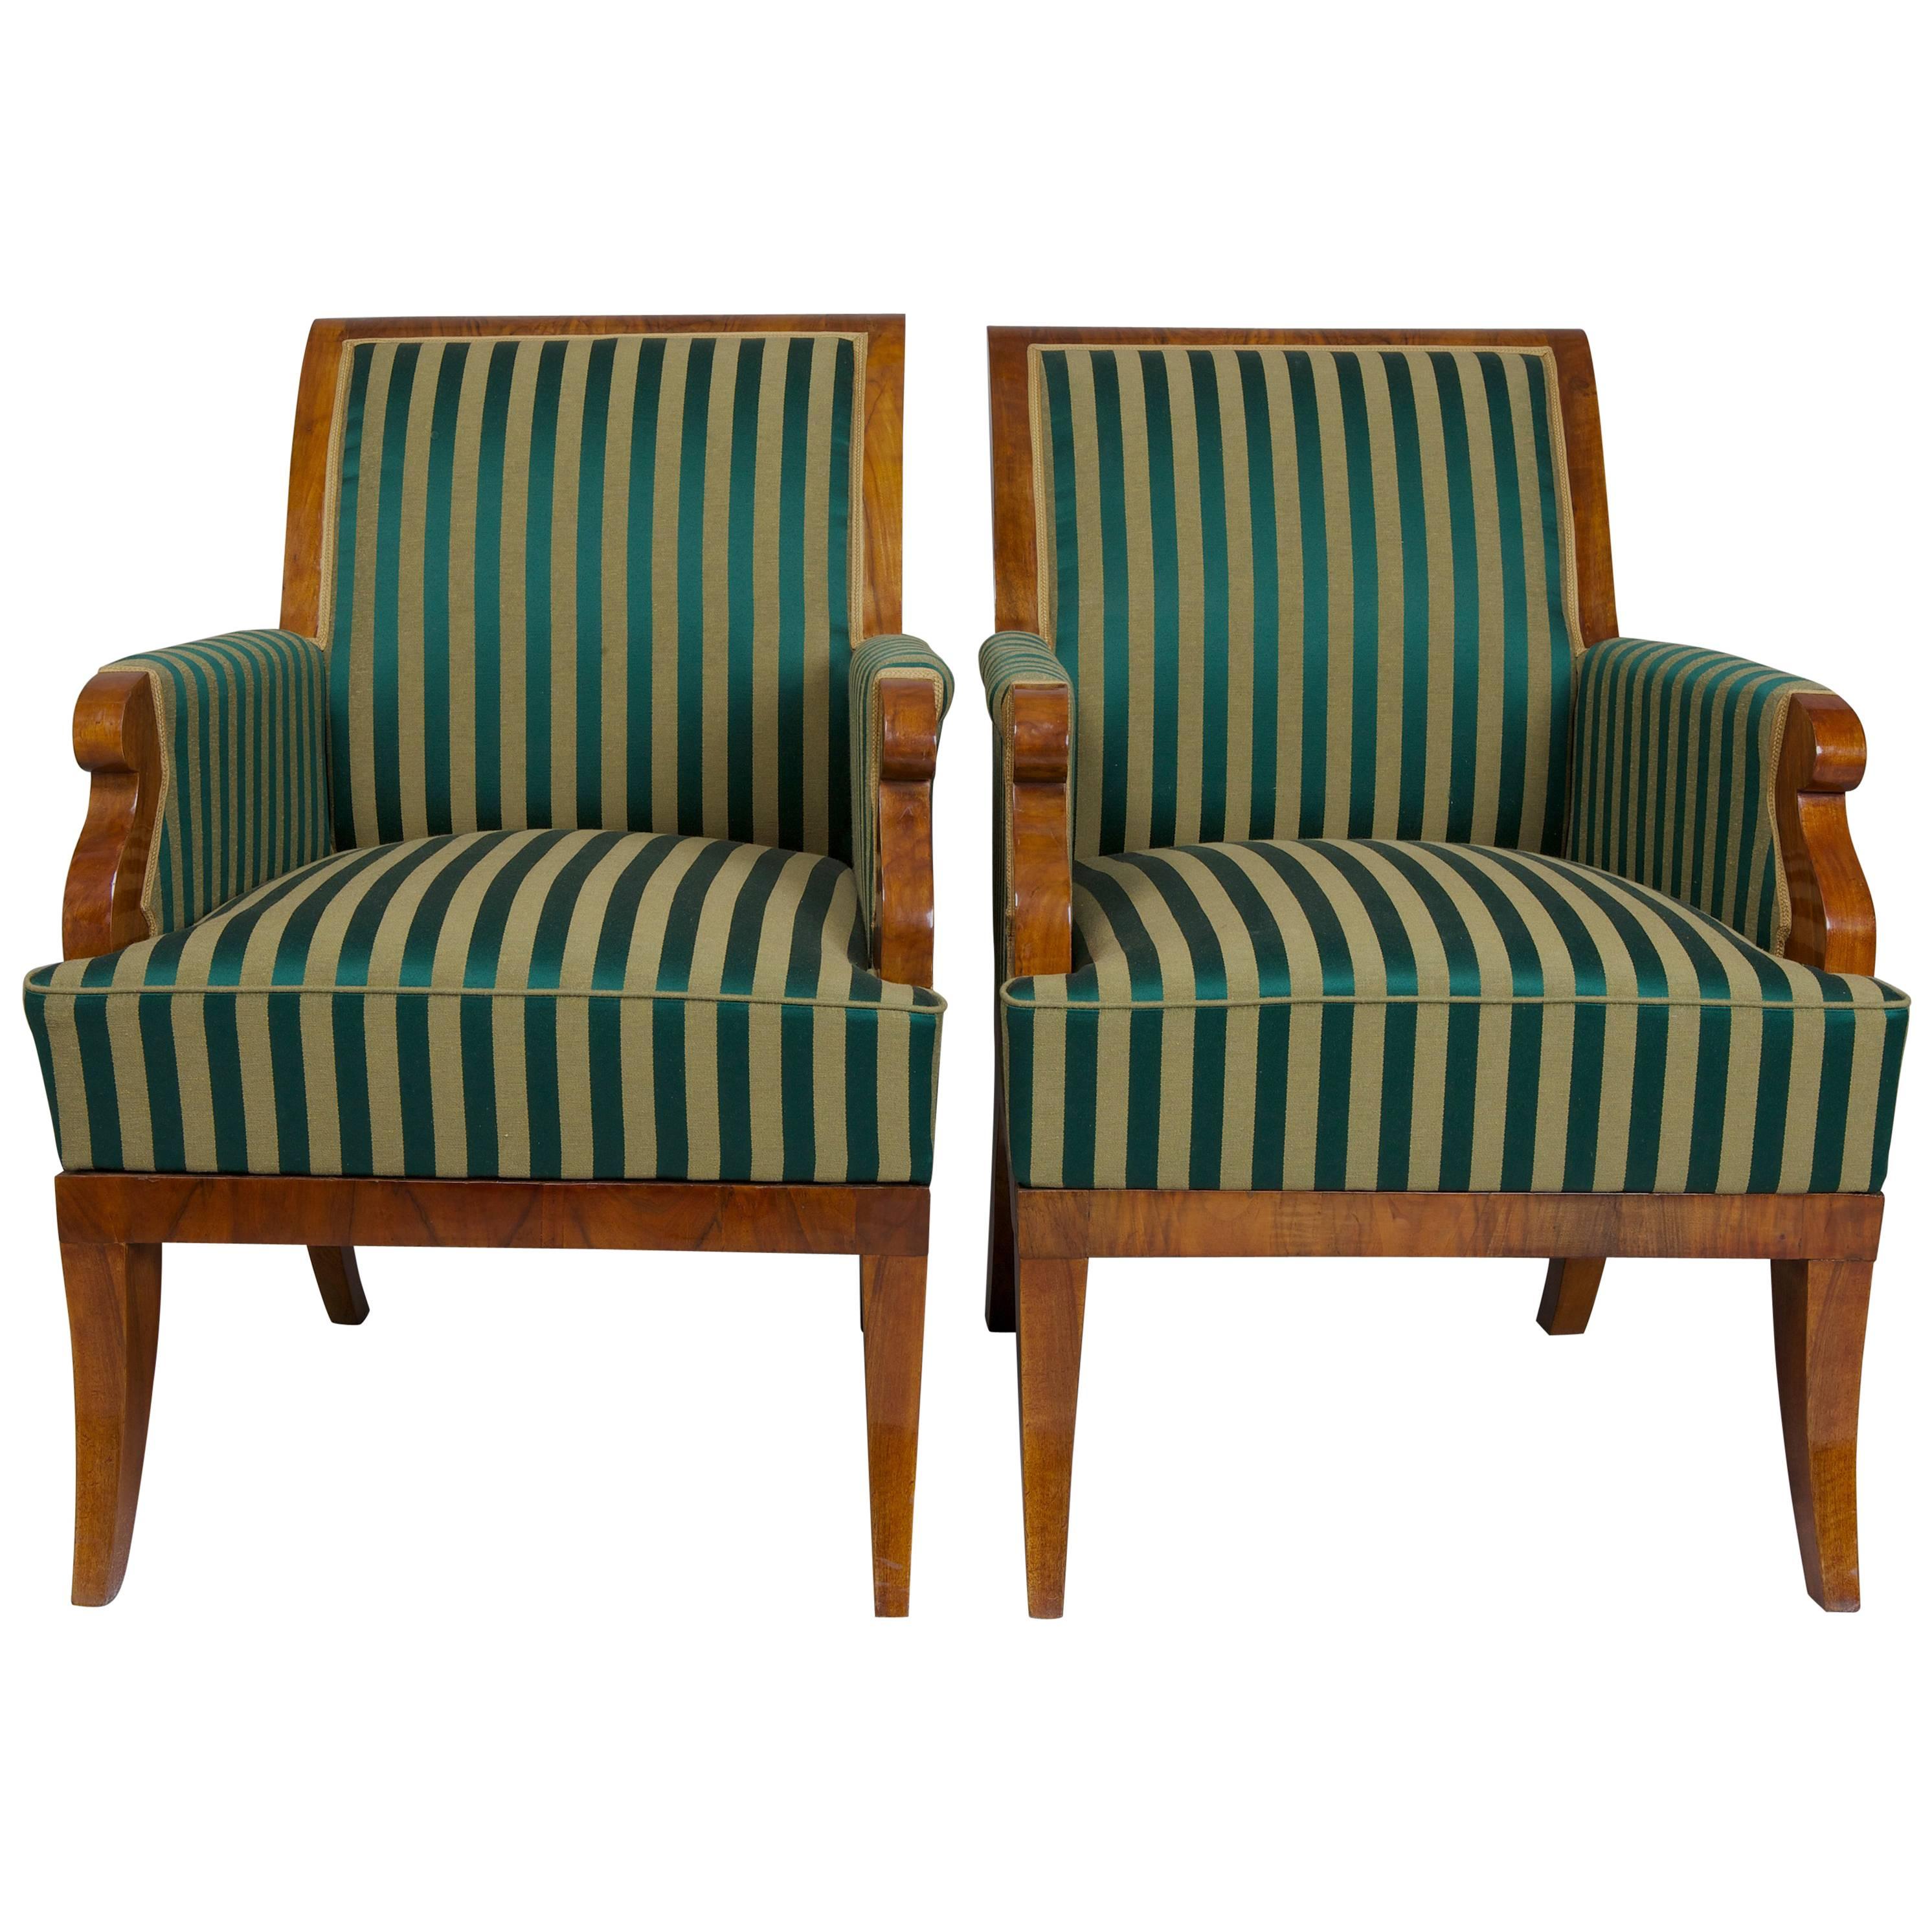 19th Century Restored Pair of Biedermeier Walnut Armchairs, Green and gold color